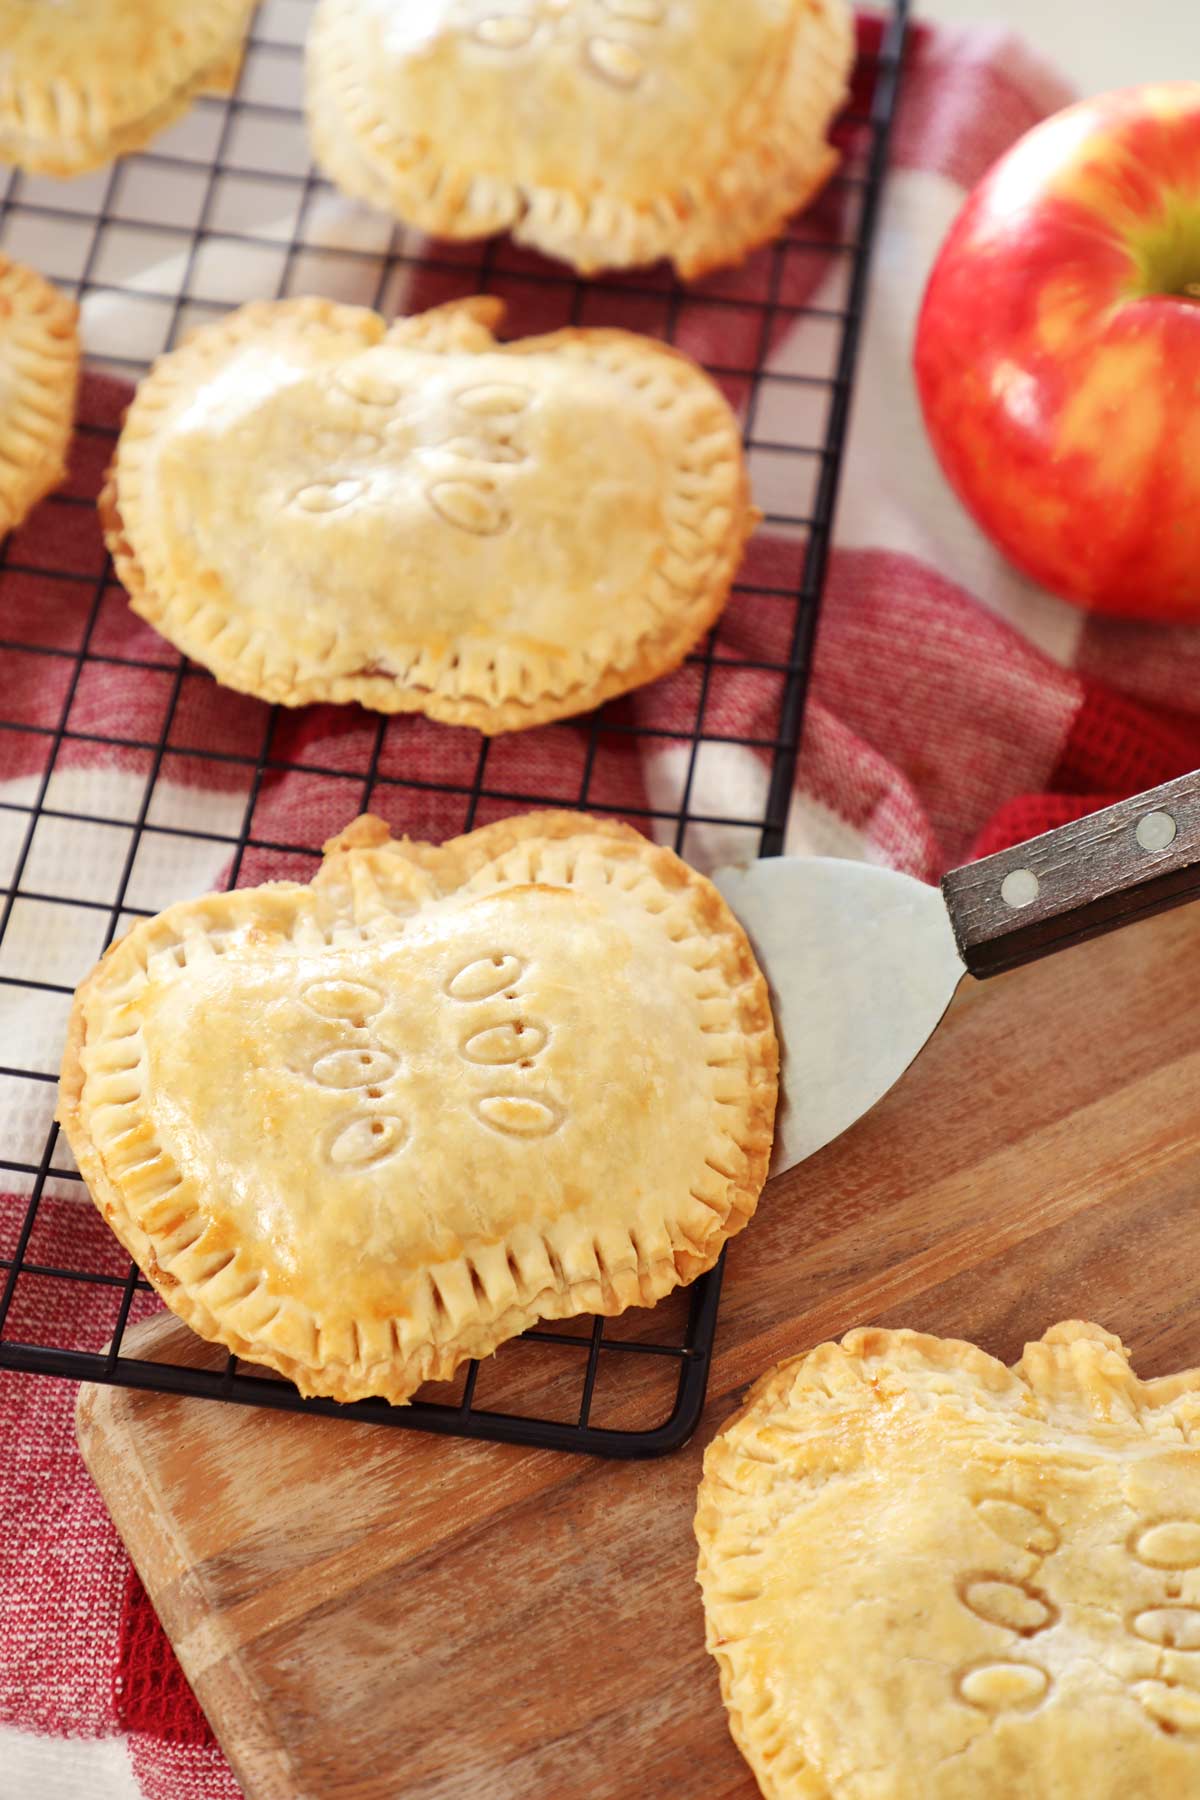 Apple Hand Pies shaped like apples resting on cooling rack, wooden board and red towel on kitchen counter with red apple in background.